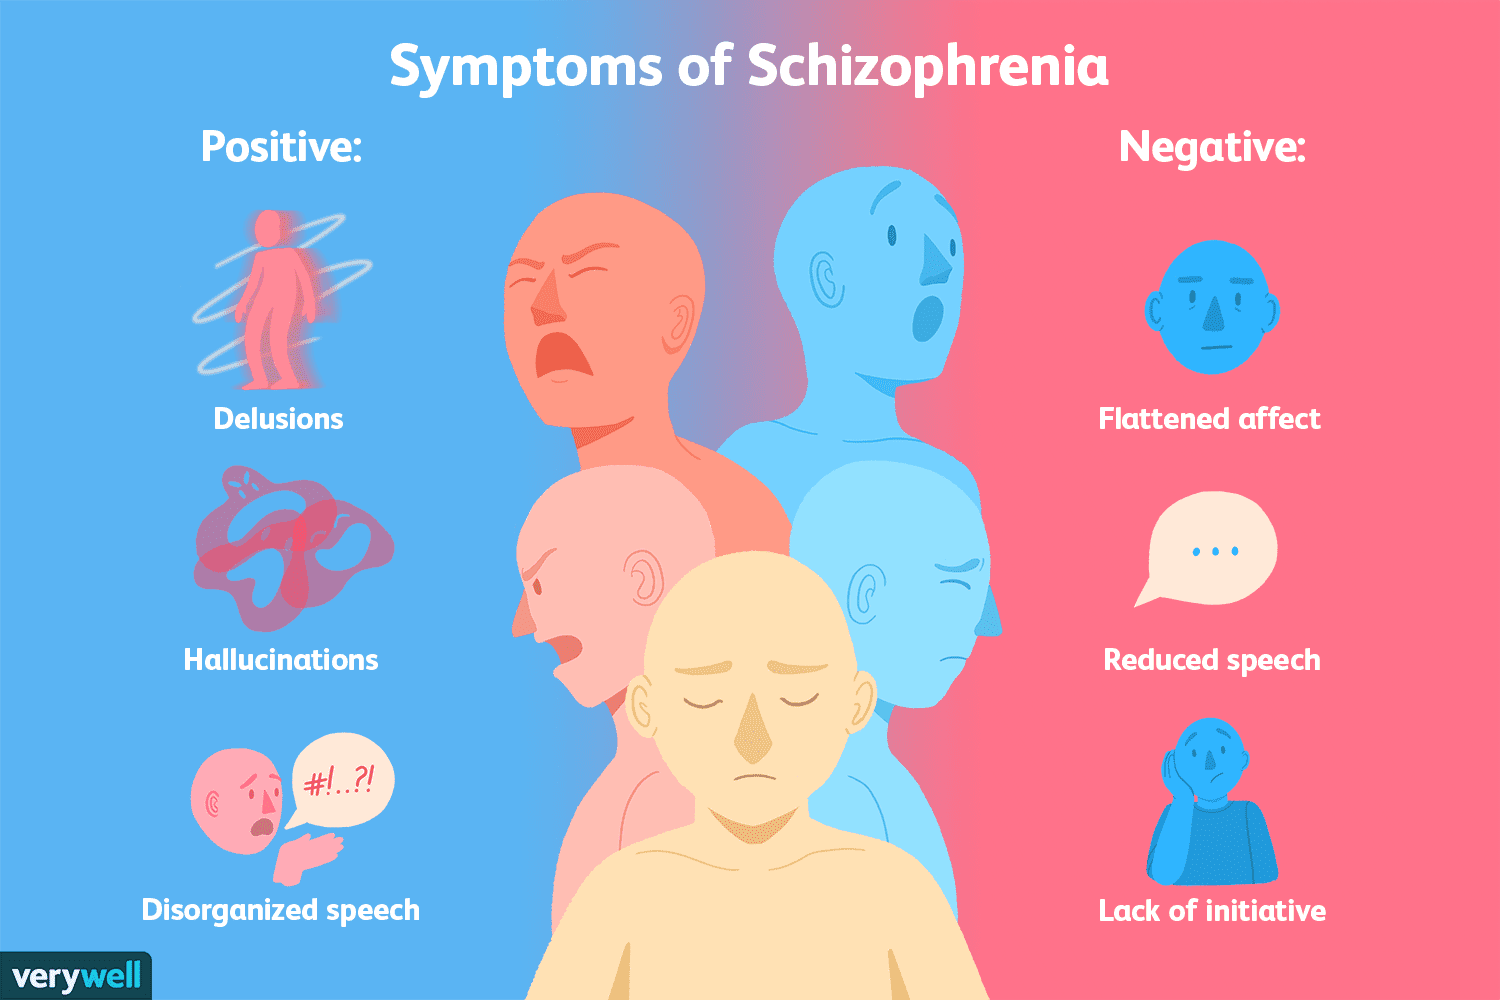 What Are the Different Types of Schizophrenia?